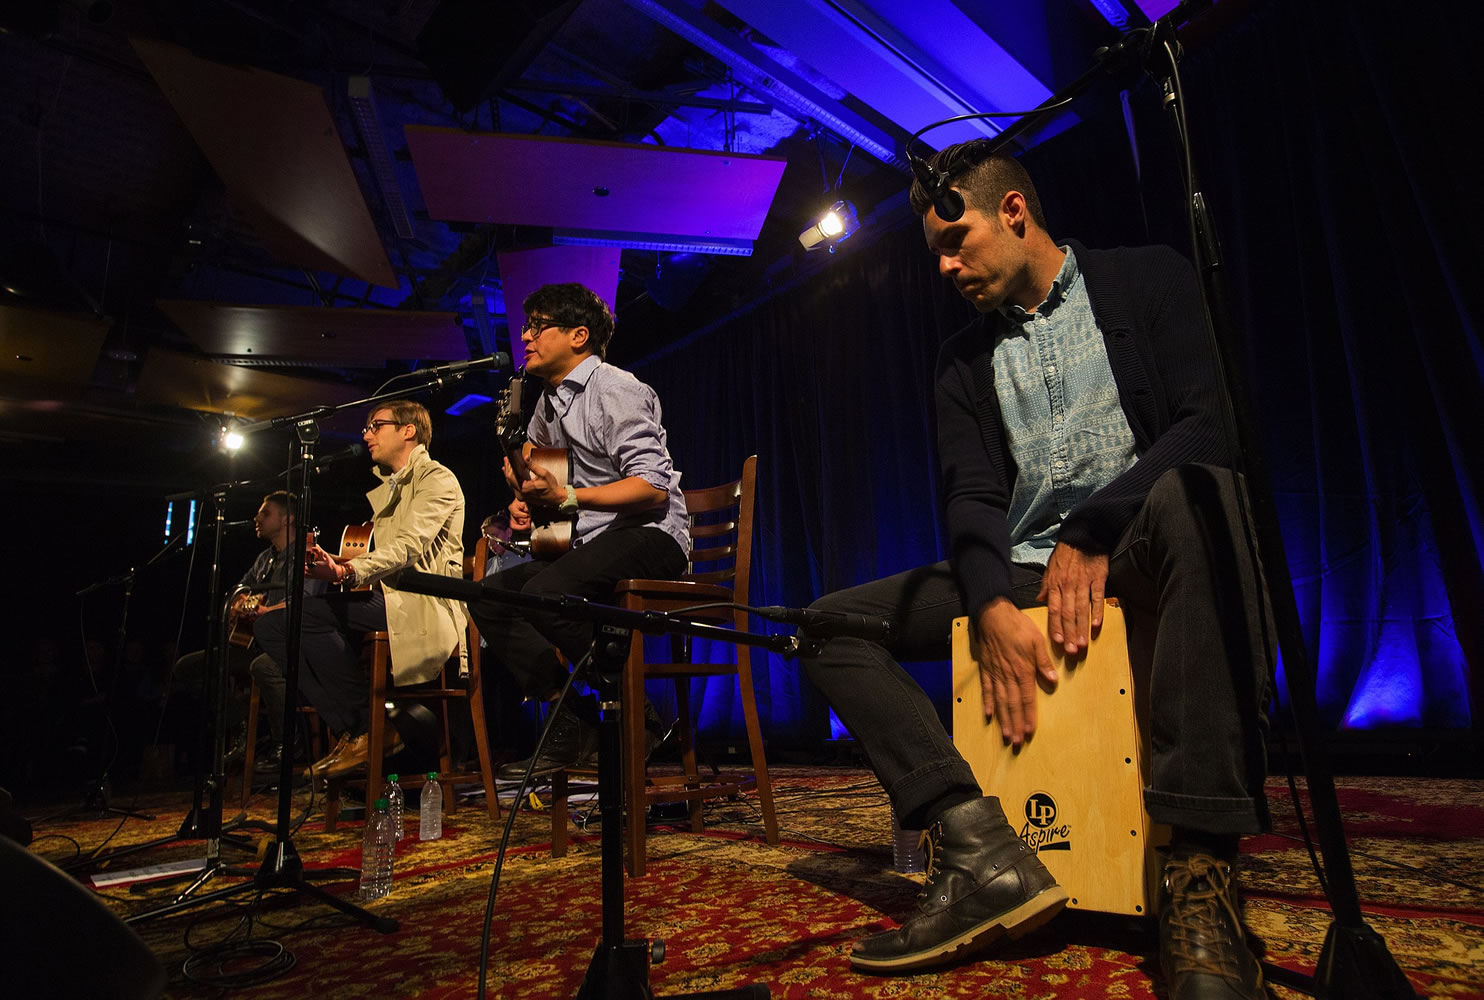 Saint Motel performs at a private concert at Amazon on April 2 in Seattle. Steve Boom, the head of Amazon Prime Music, wants to bring the live performances at Amazon to Prime Music as well.